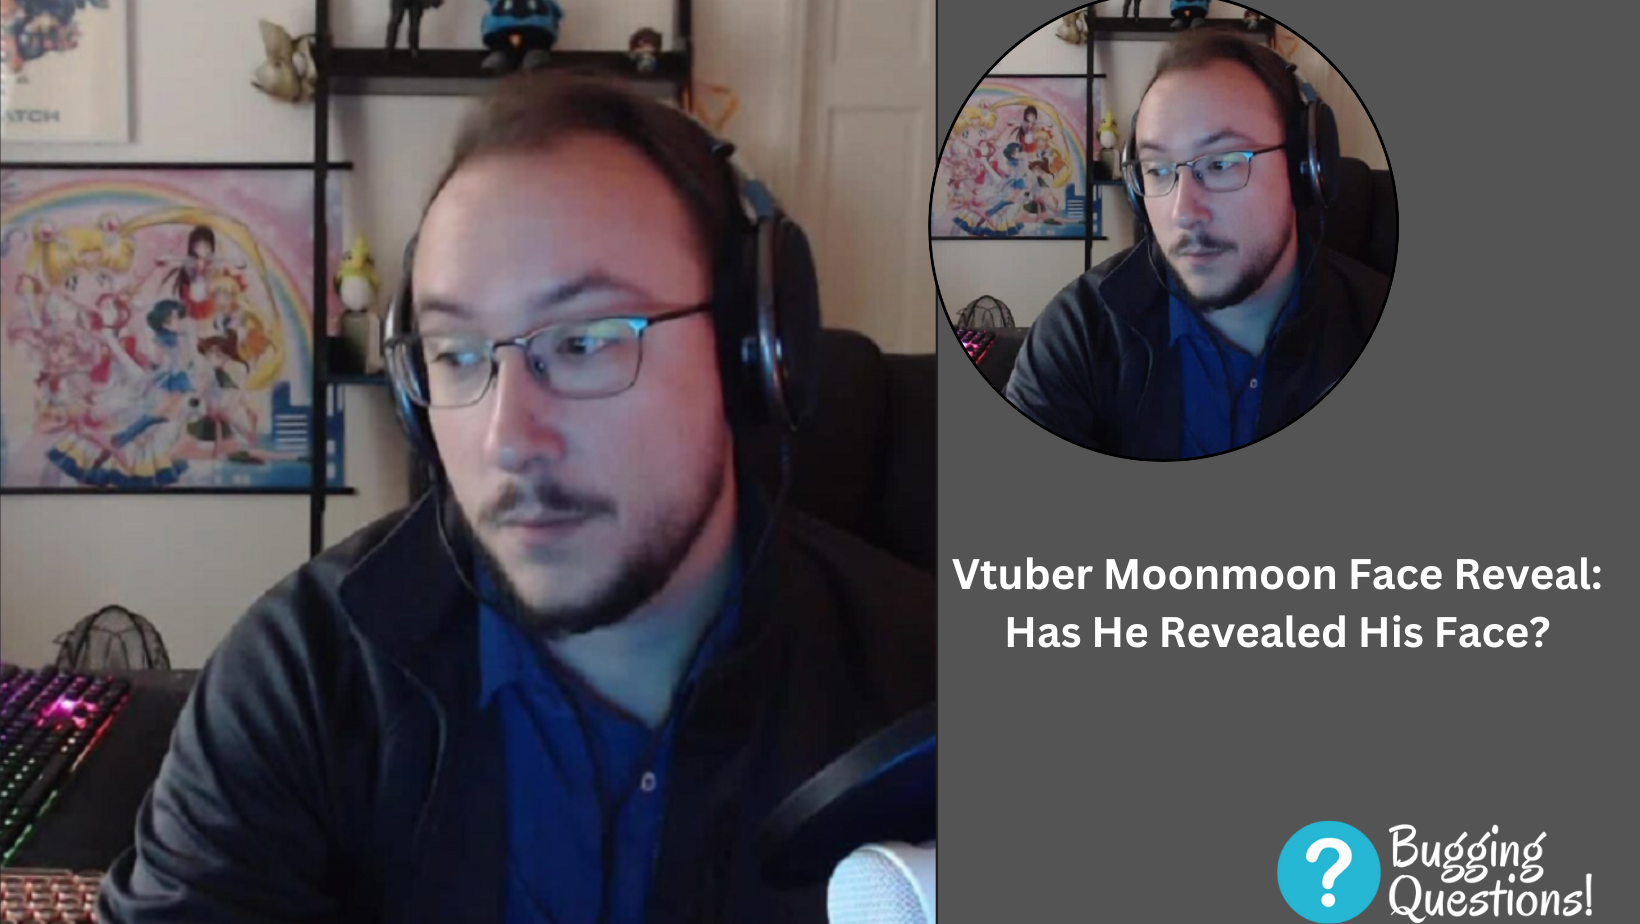 Vtuber Moonmoon Face Reveal: Has He Revealed His Face?